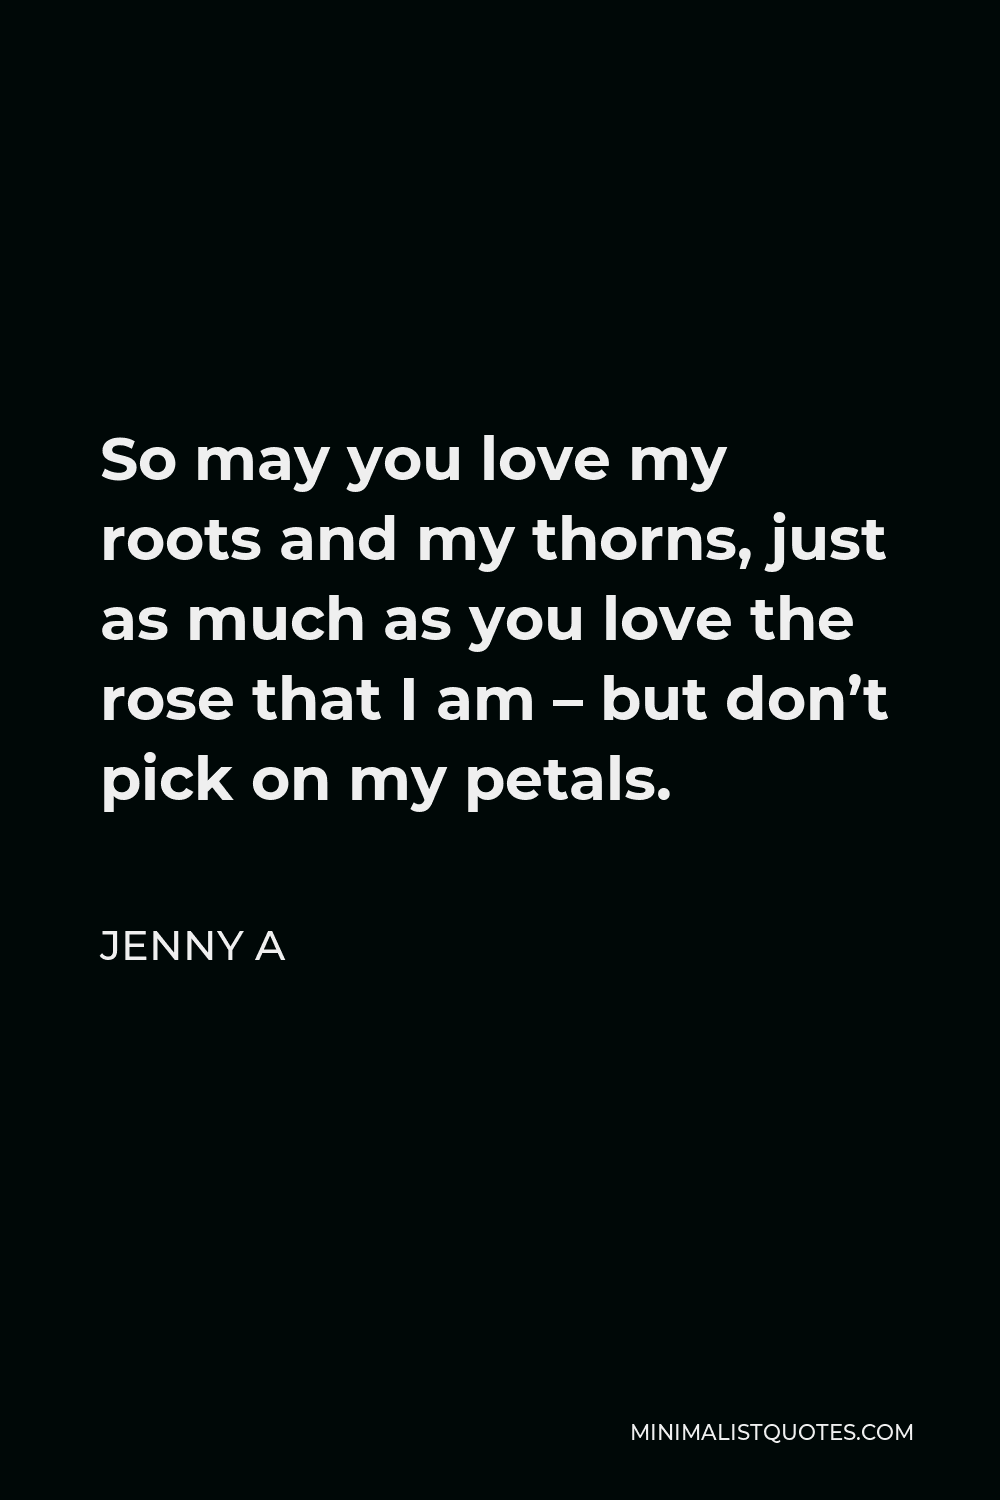 Jenny A Quote - So may you love my roots and my thorns, just as much as you love the rose that I am – but don’t pick on my petals.